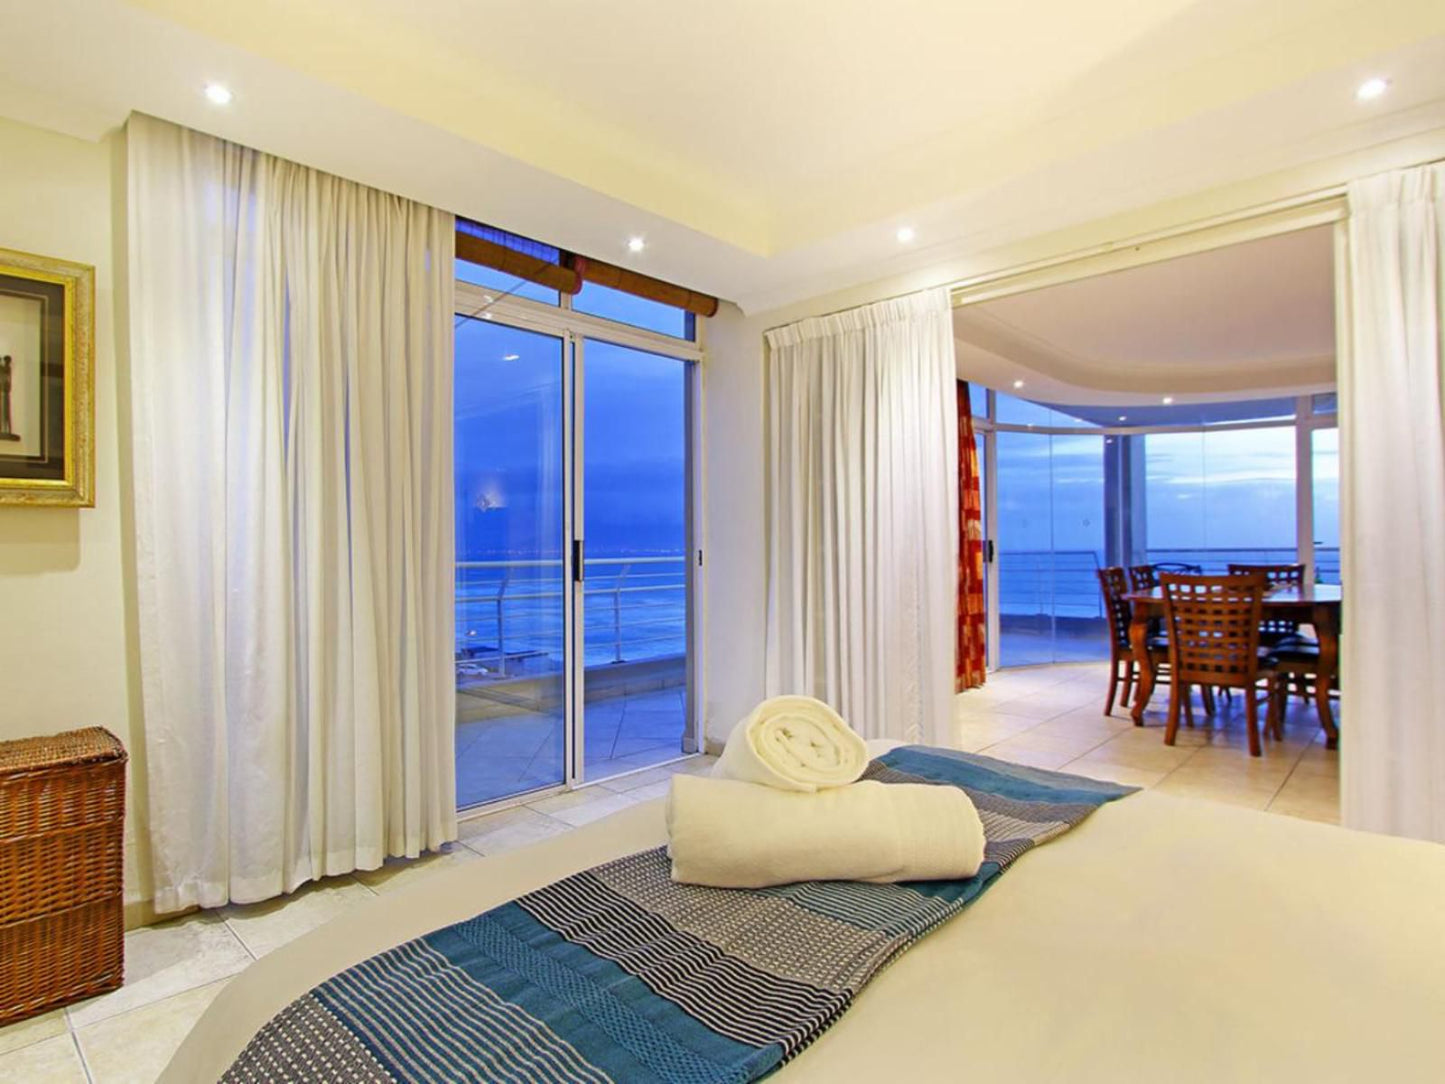 Ocean View C602 By Hostagents Bloubergstrand Blouberg Western Cape South Africa 